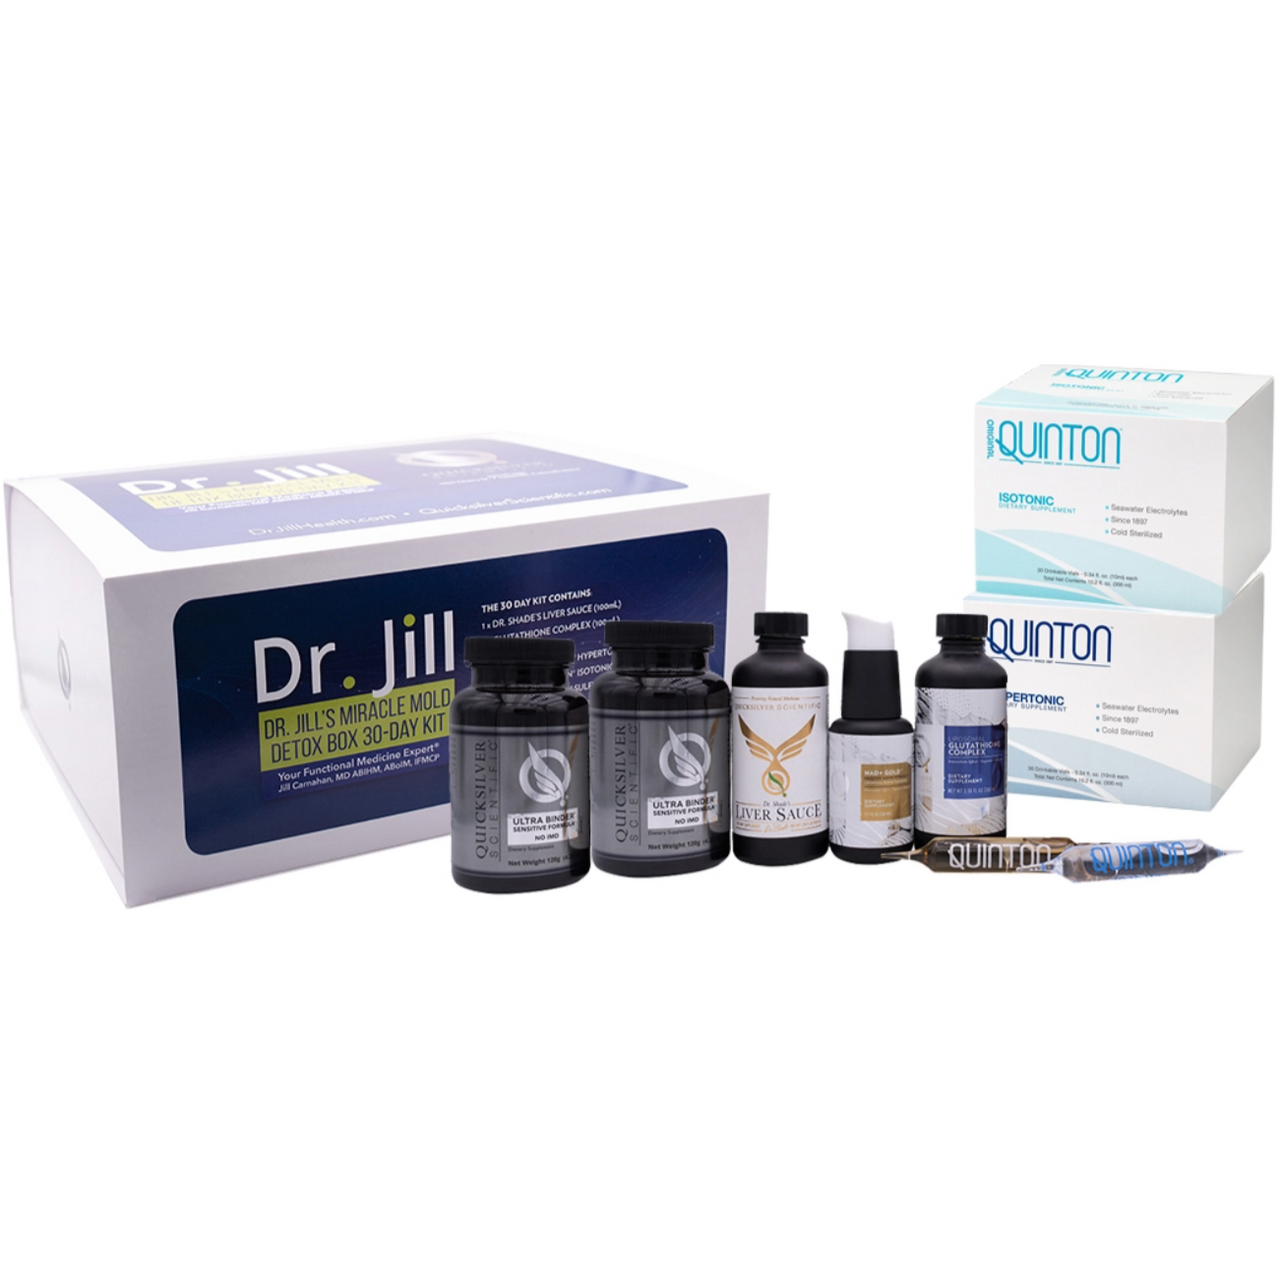 Miracle Mold Detox Box - Quicksilver Scientific - 30 Day Patented Mold Detoxification Kit